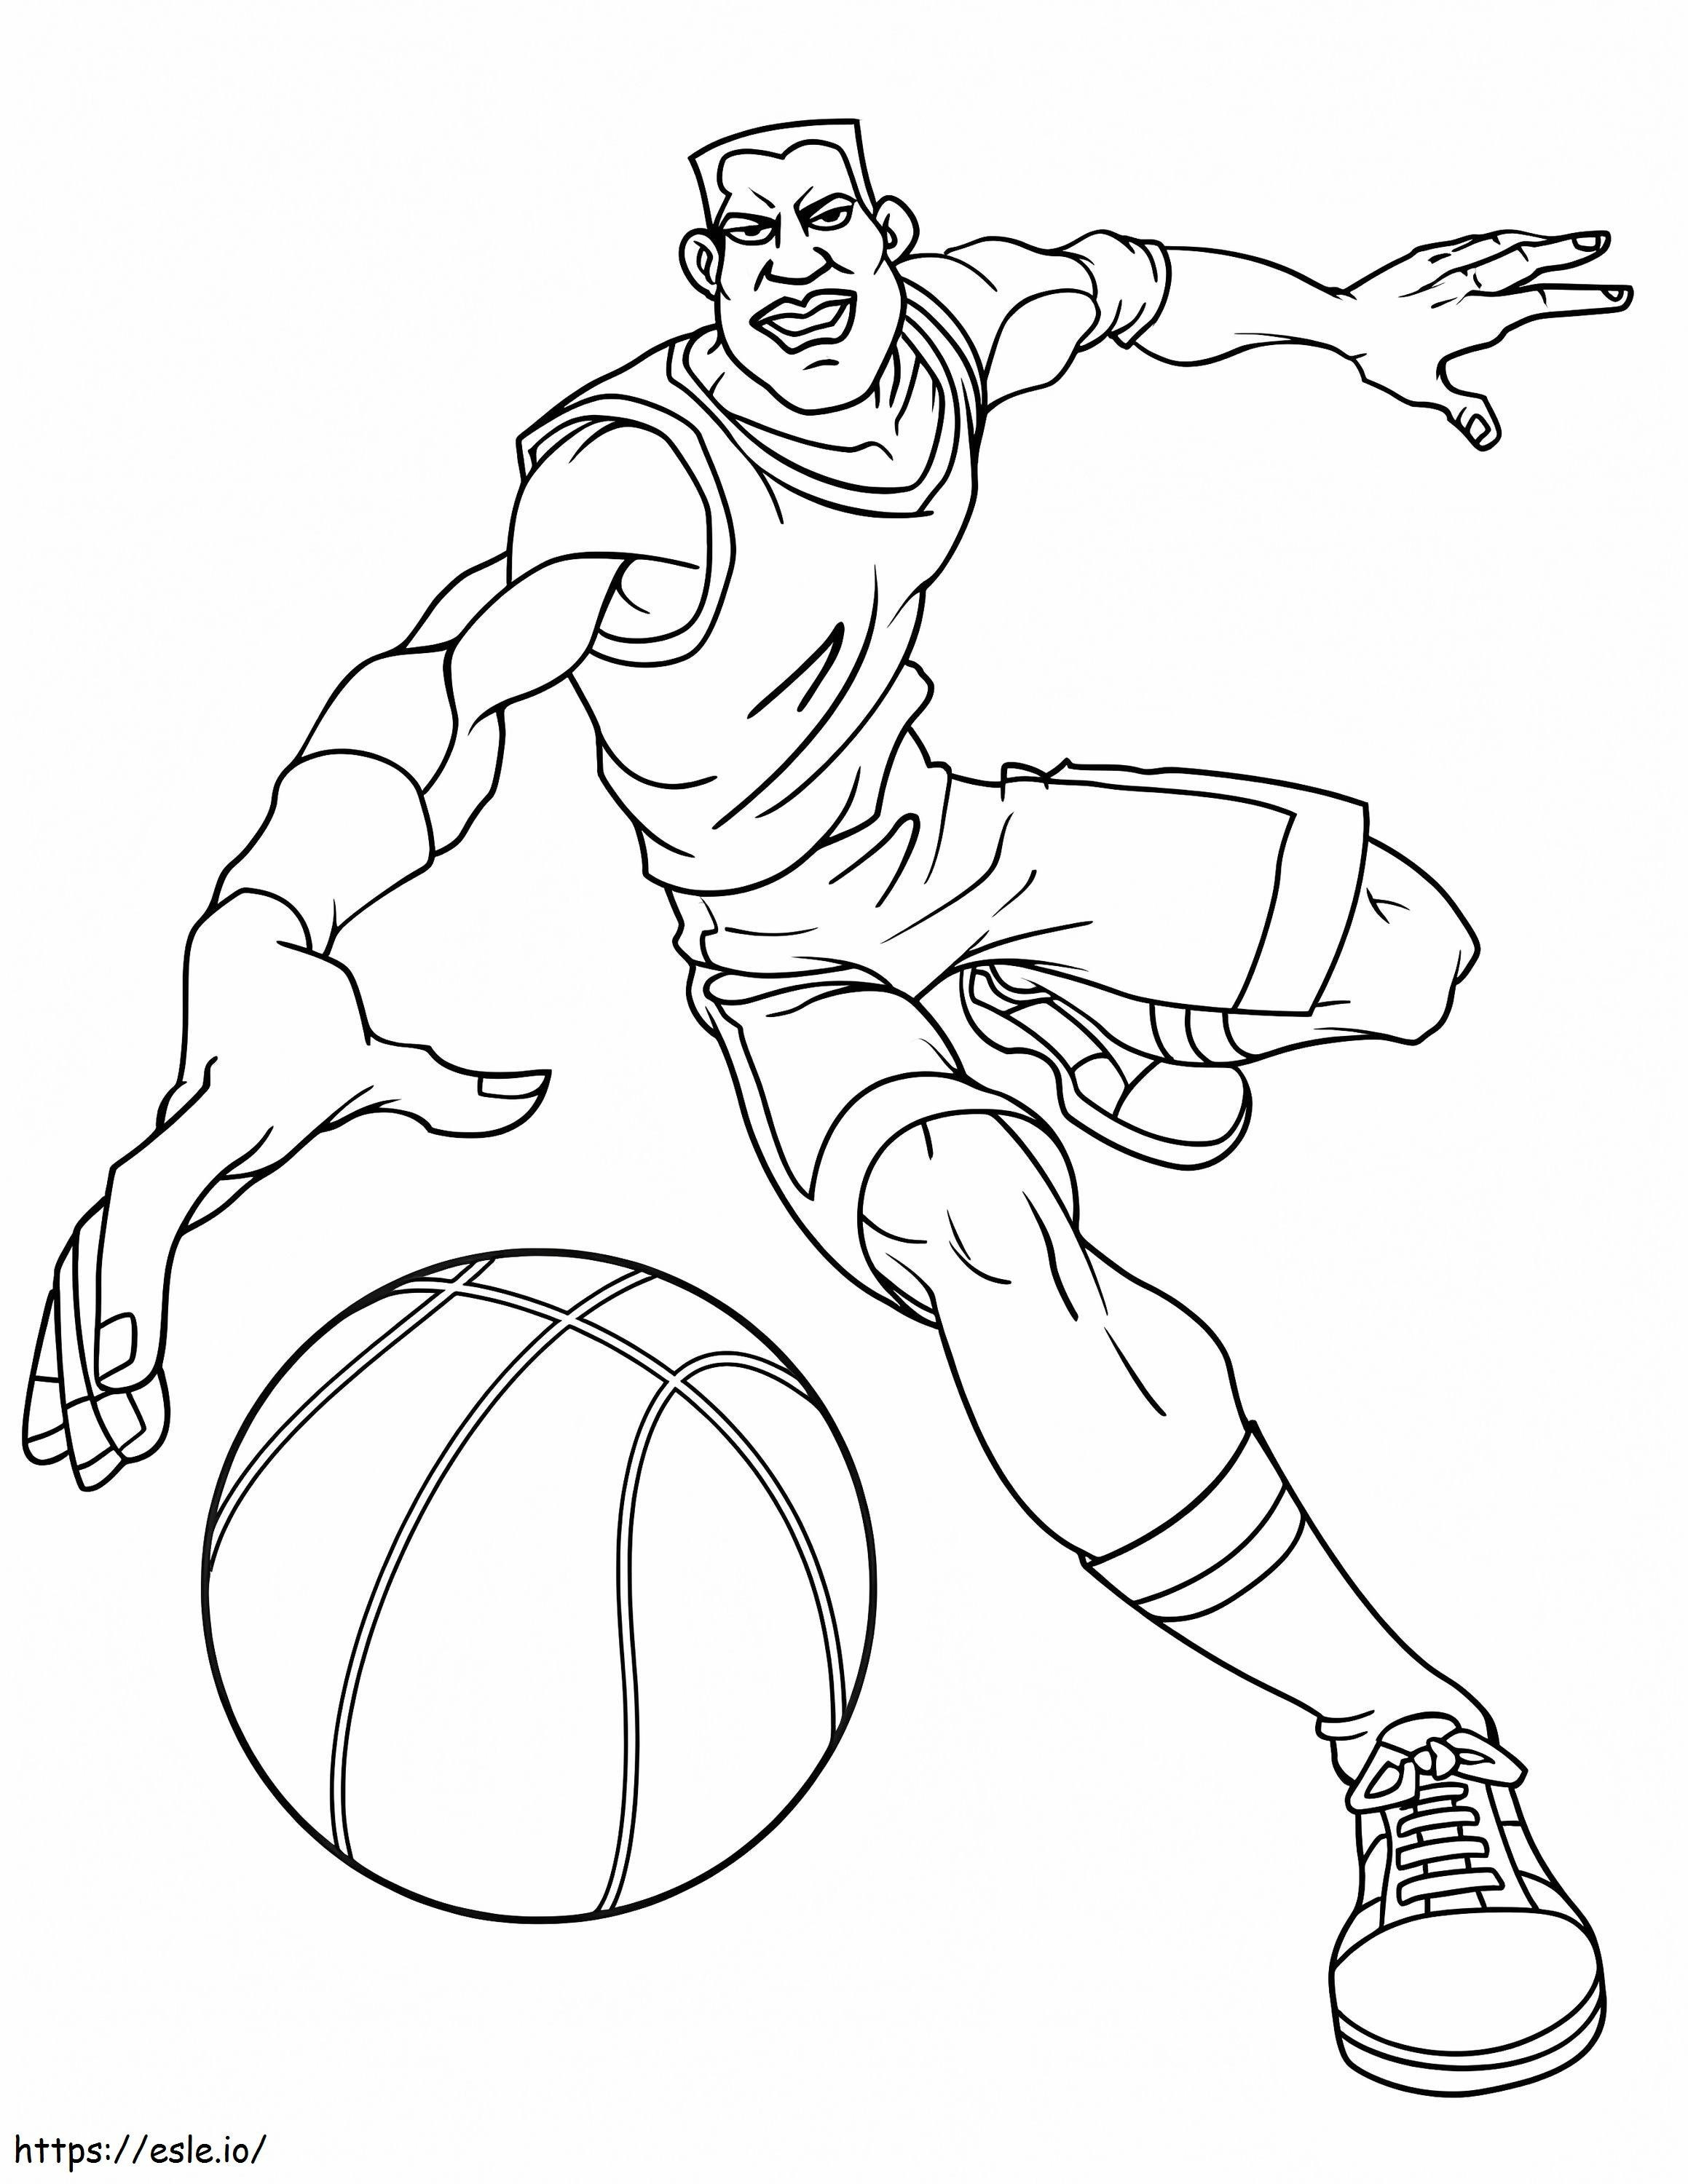 Man Running With Basketball coloring page